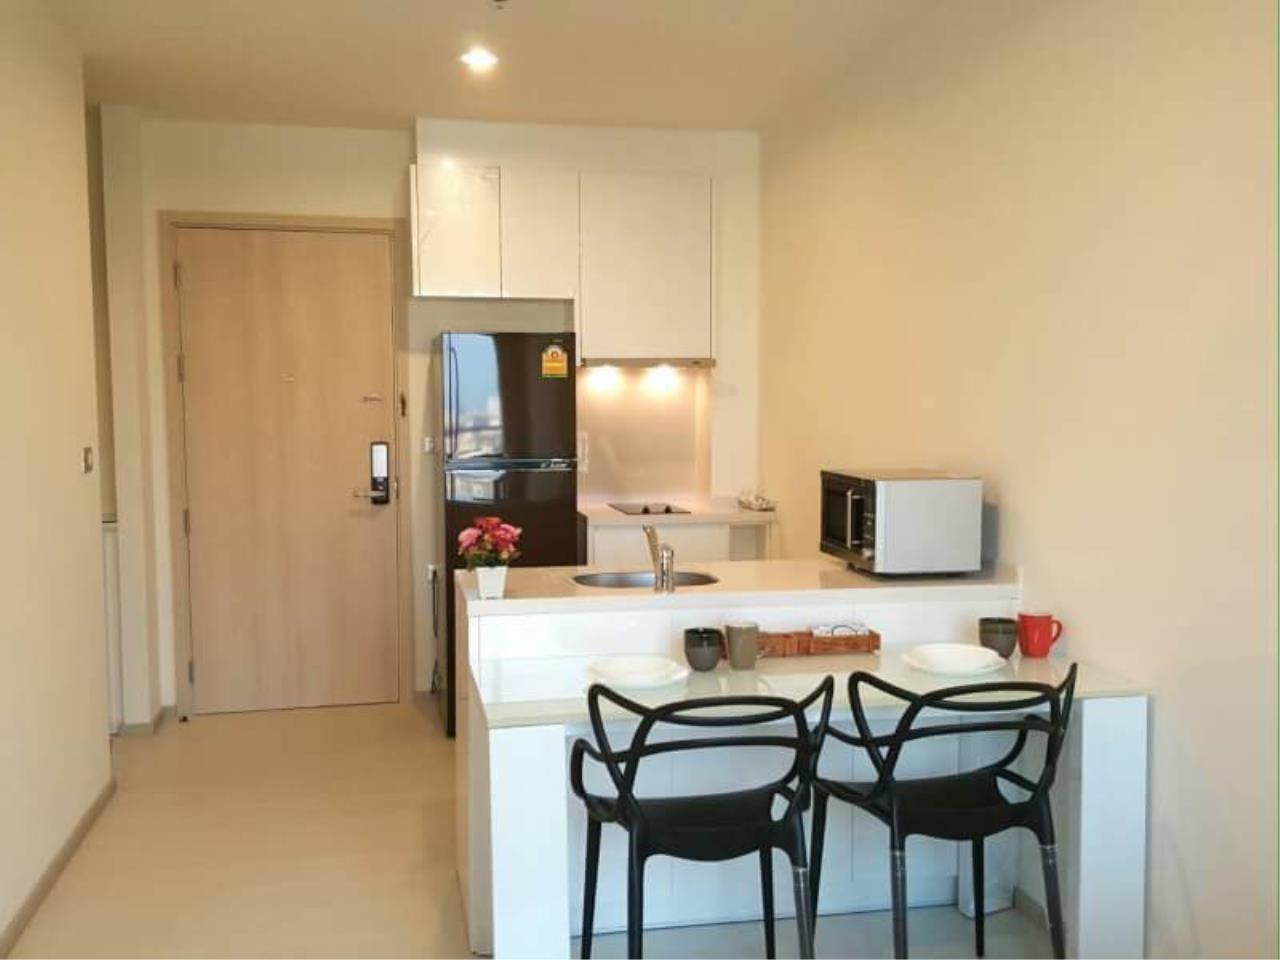 RE/MAX All Star Realty Agency's Rhythm 44 for rent (BTS Phra kanong) 2